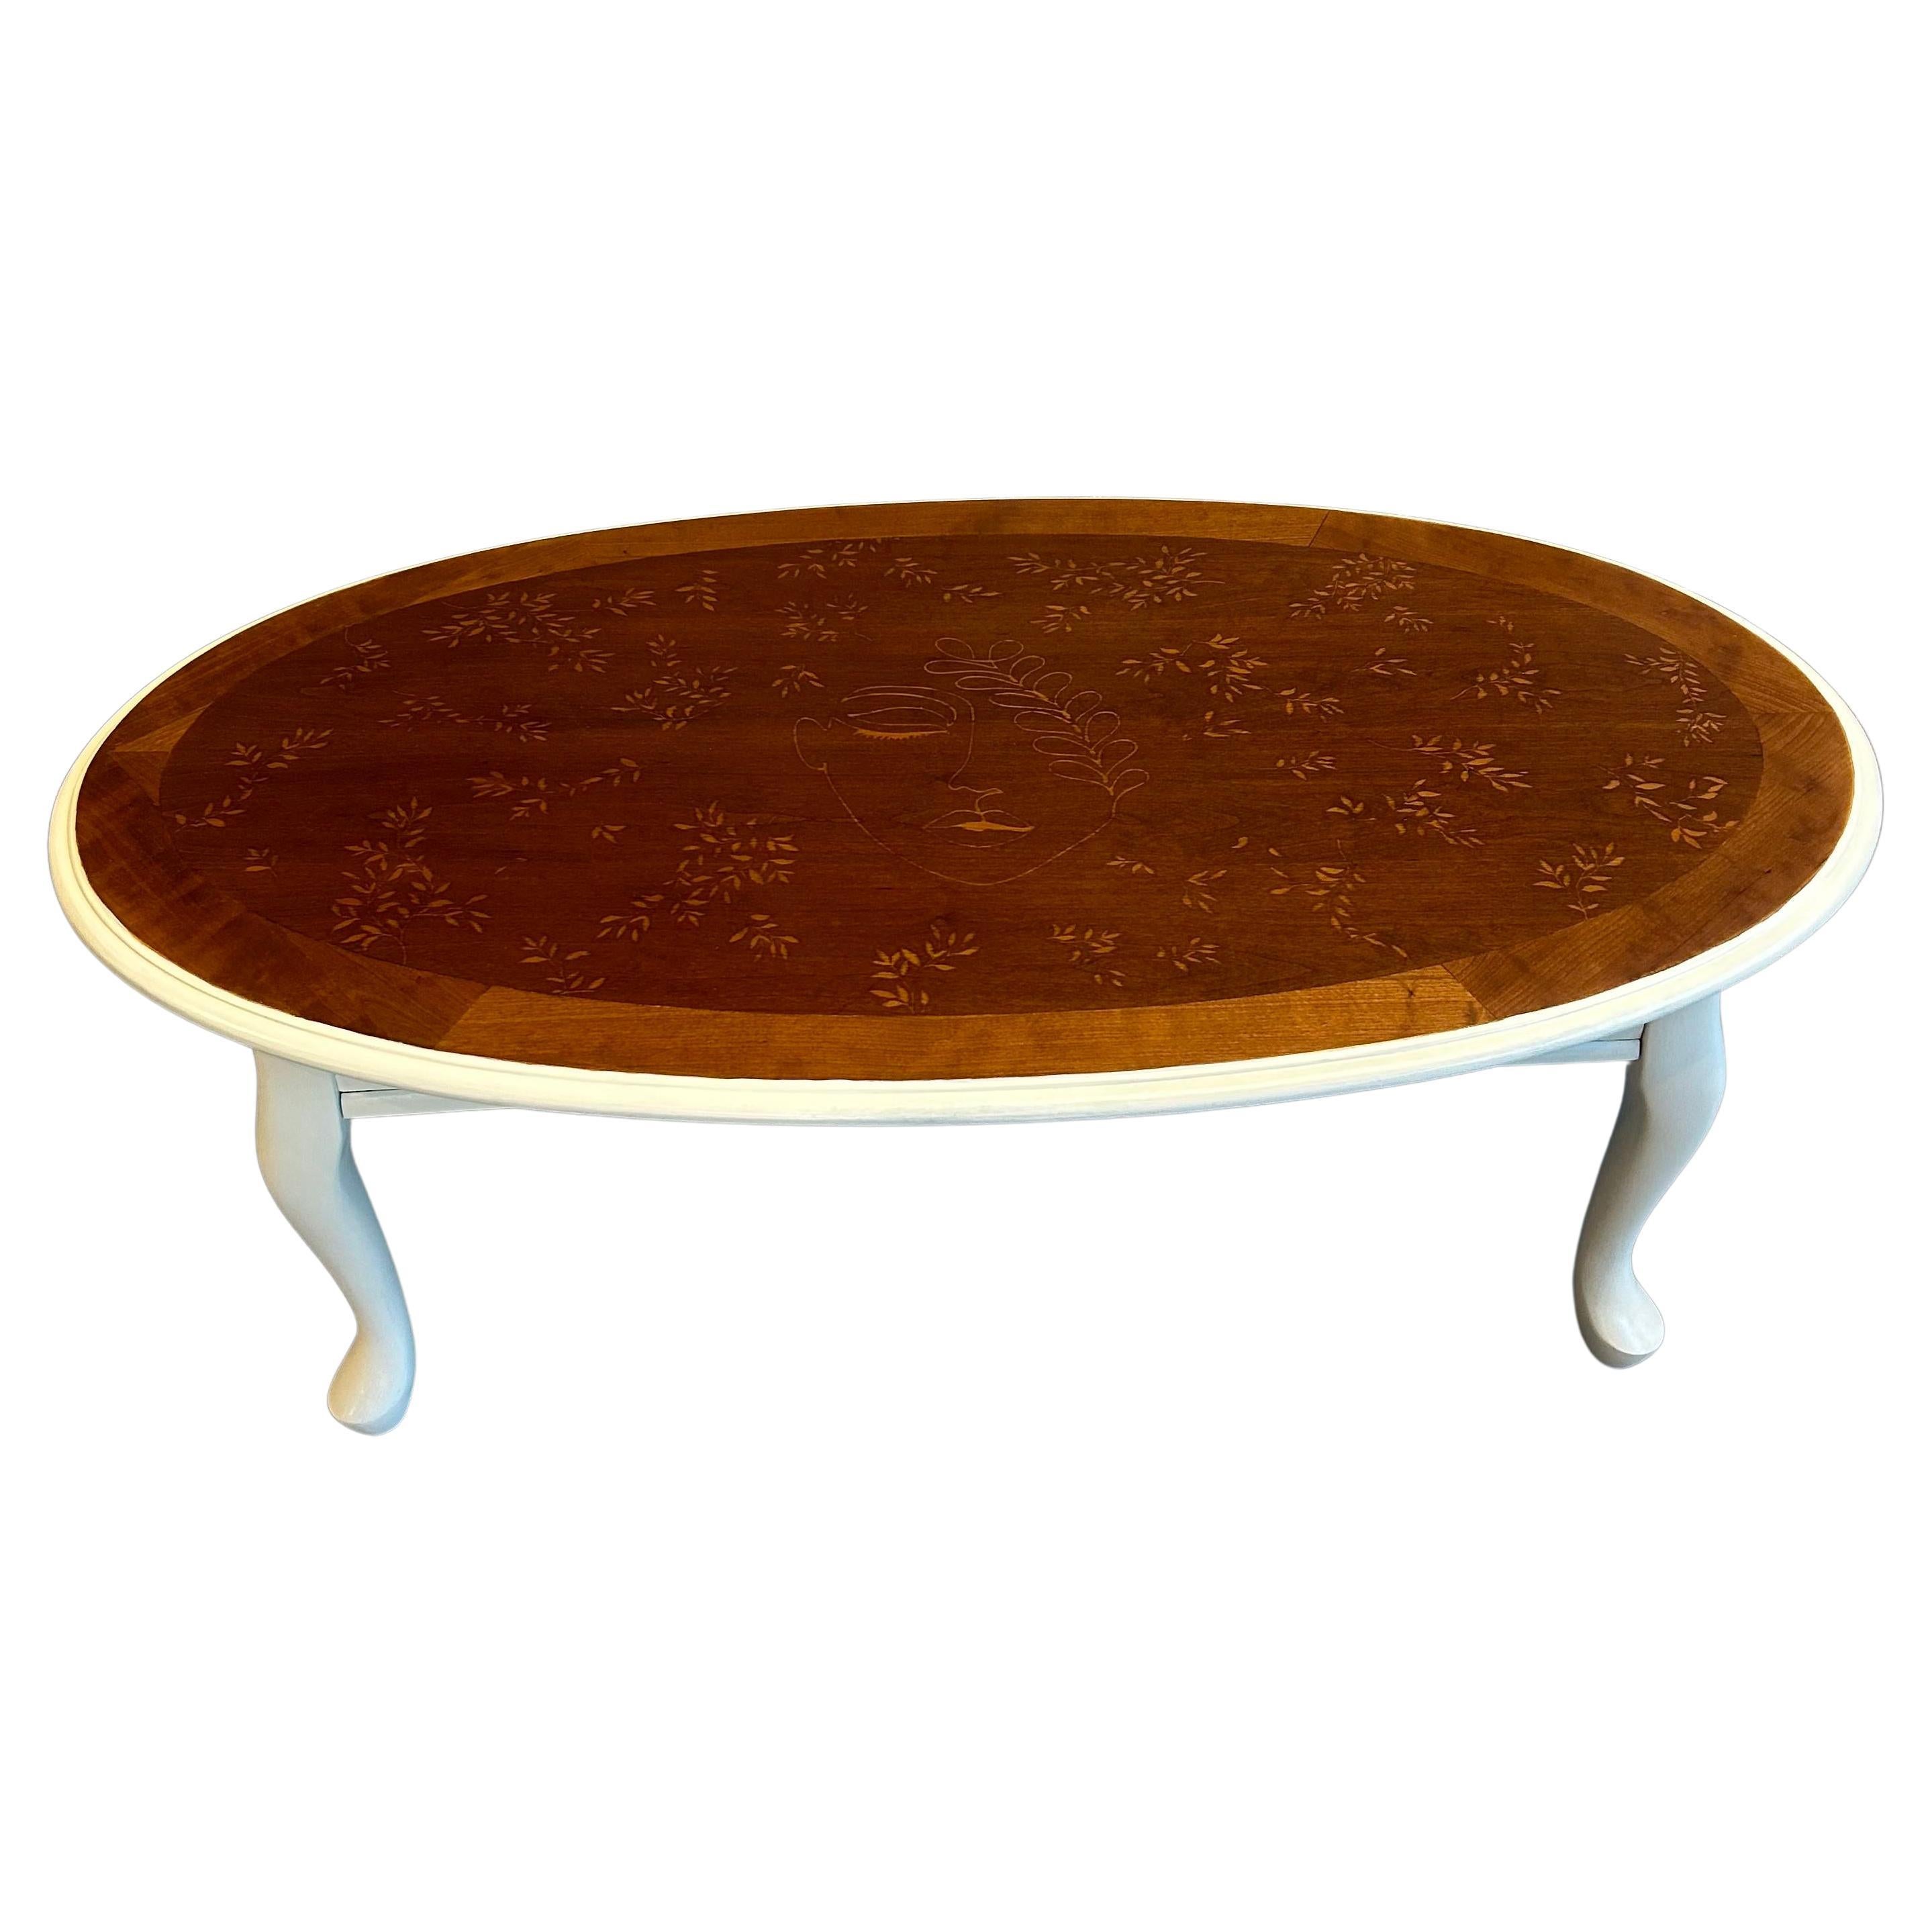 Vintage Oval Coffee Table - Natural and White Botanical Theme For Sale